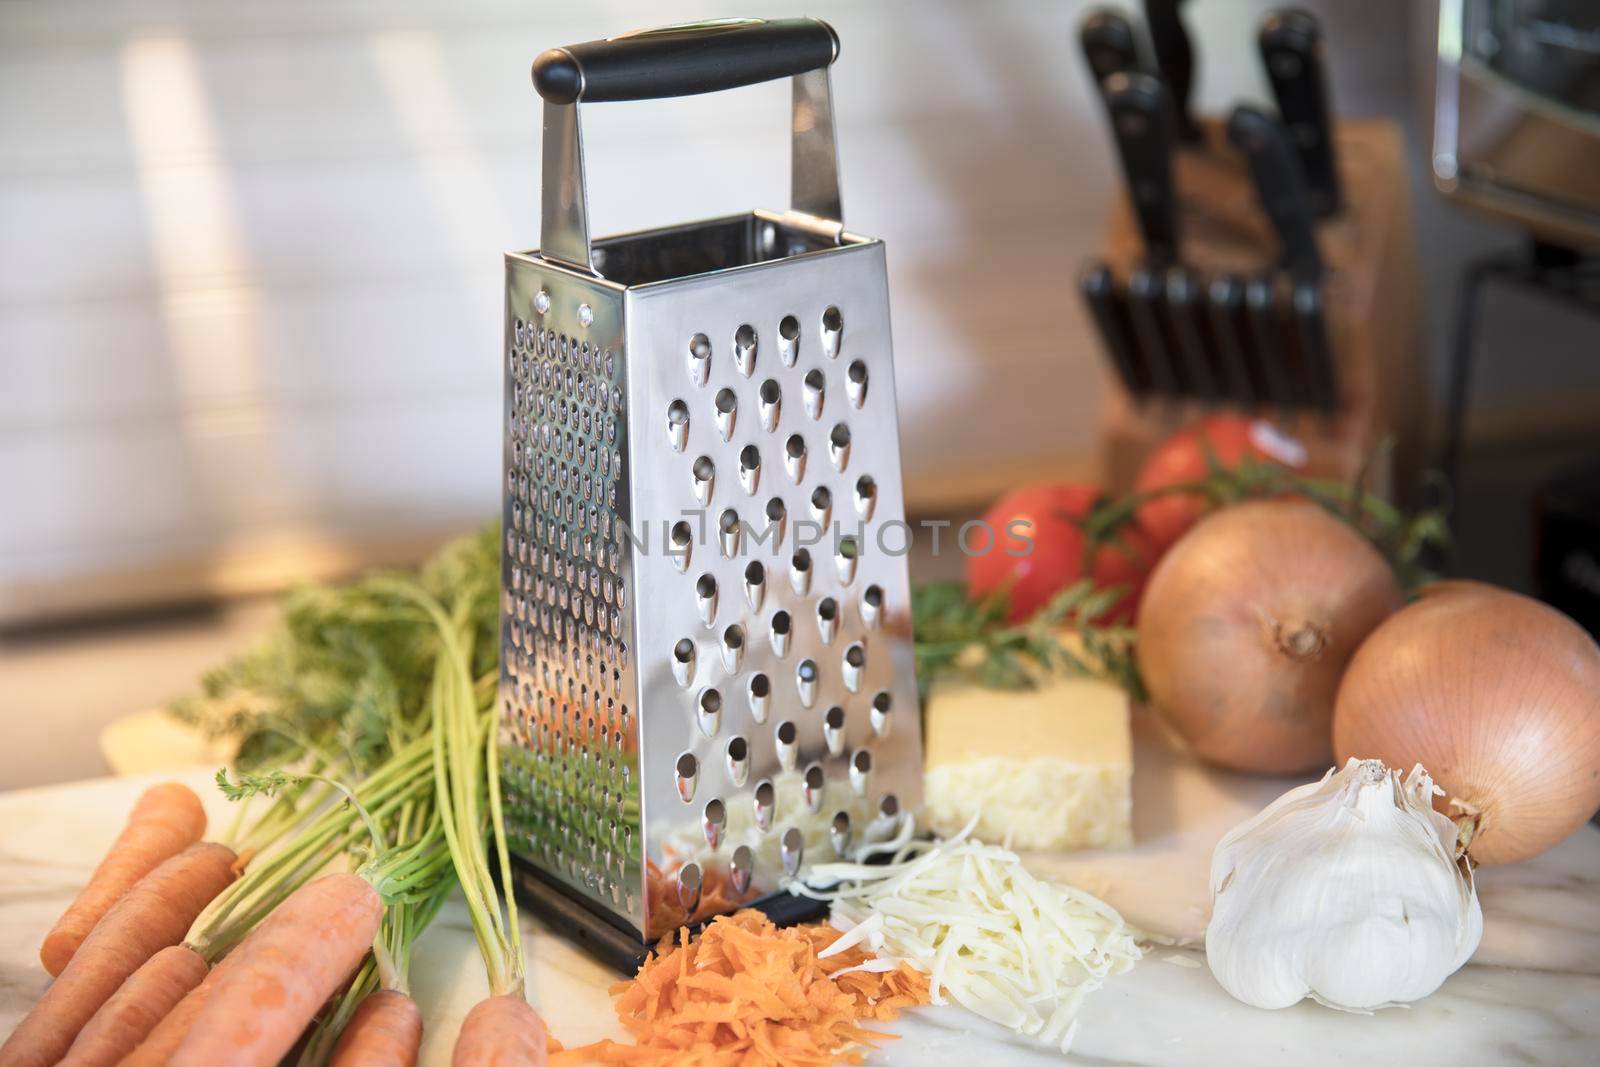 Cheese grater in kitchen surrounded by carrots,  cheese, garlic, onions.